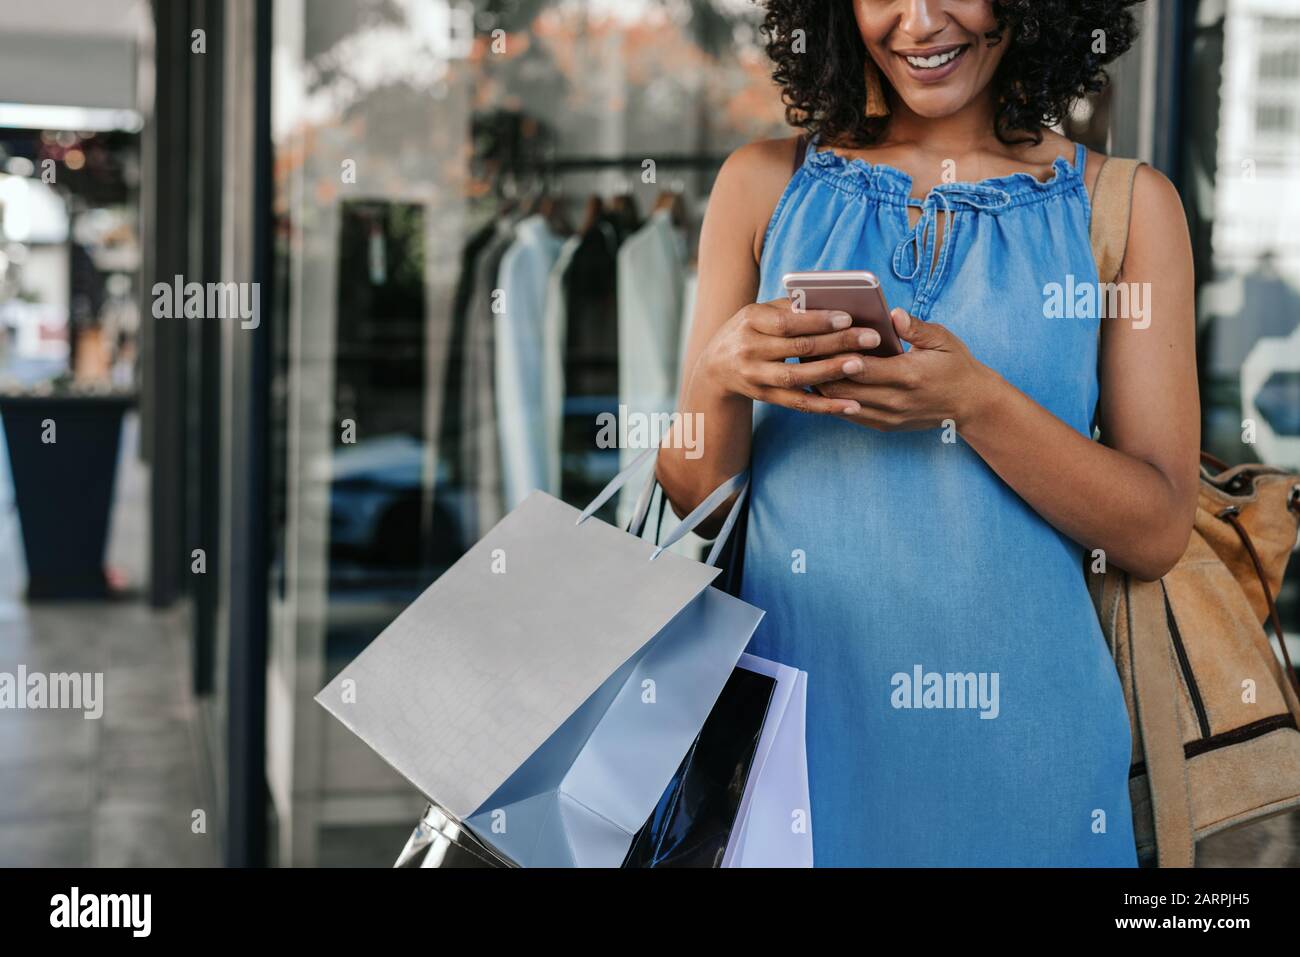 Smiling woman using her cellphone while out shopping for clothes Stock Photo